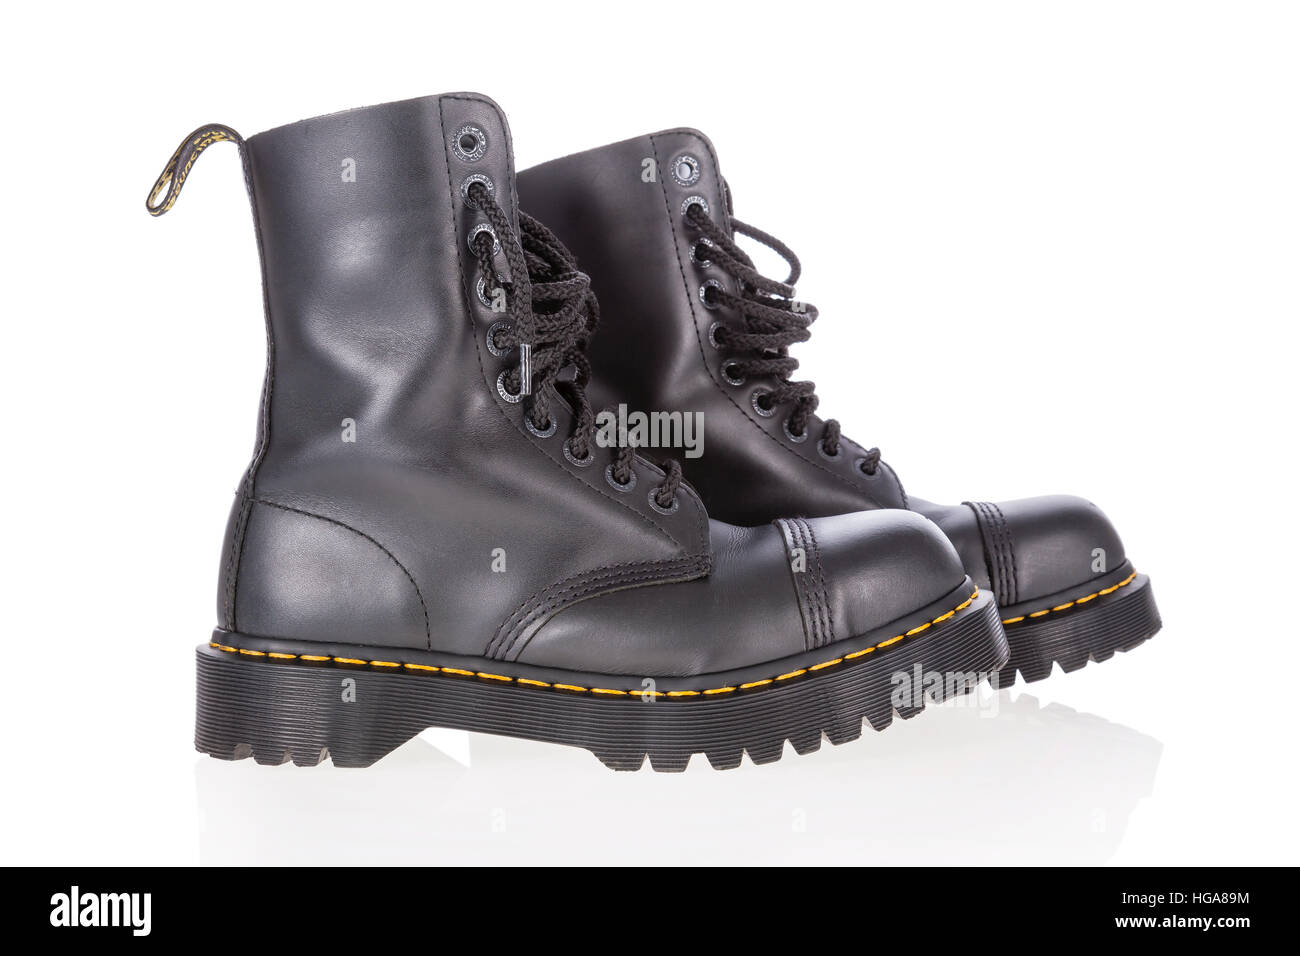 Dr. Martens black leather work boots with steel toe and military style  isolated on white background Stock Photo - Alamy